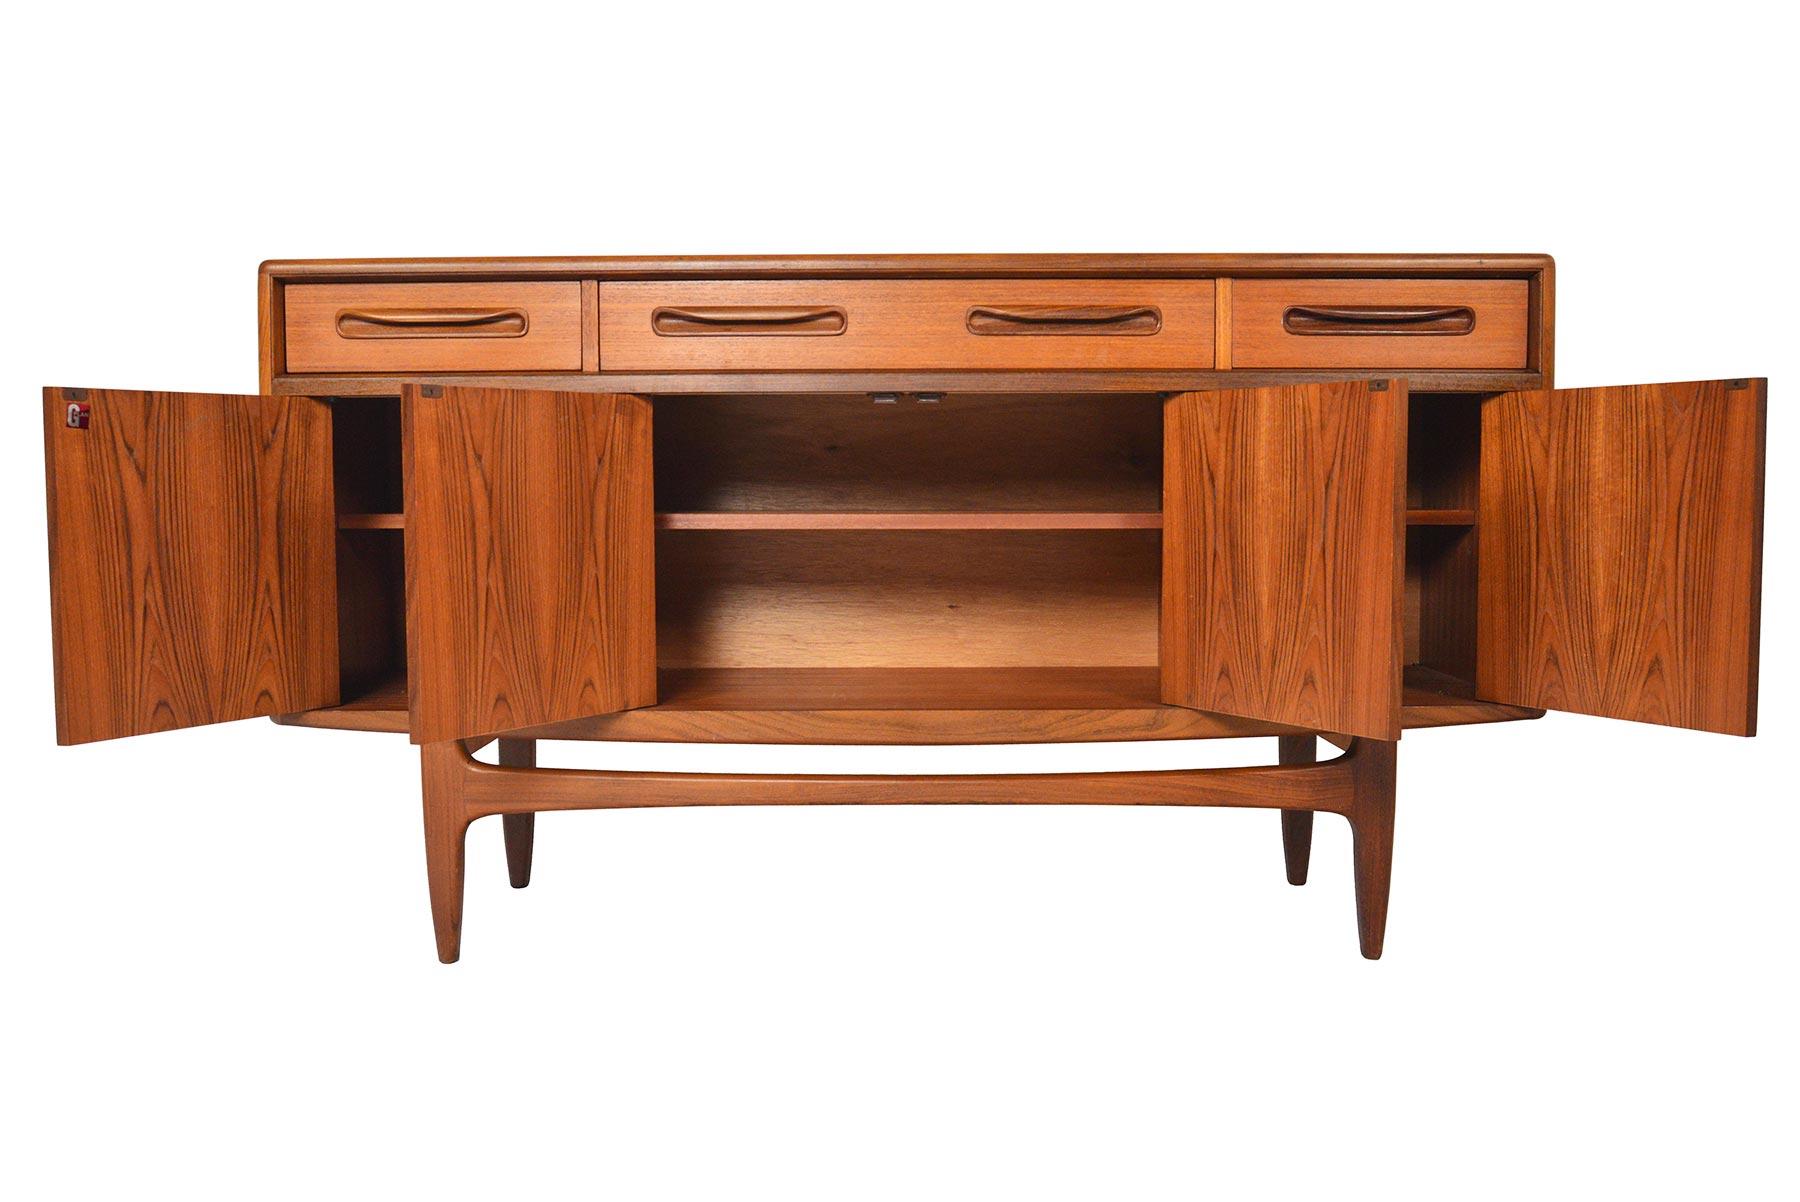 This small Mid-Century Modern G Plan Fresco teak credenza was designed by Victor Wilkins in the 1960s. Beautiful afromosia pulls adorn the drawers and doors of this piece. Left, center, and right doors open to reveal open storage and adjustable